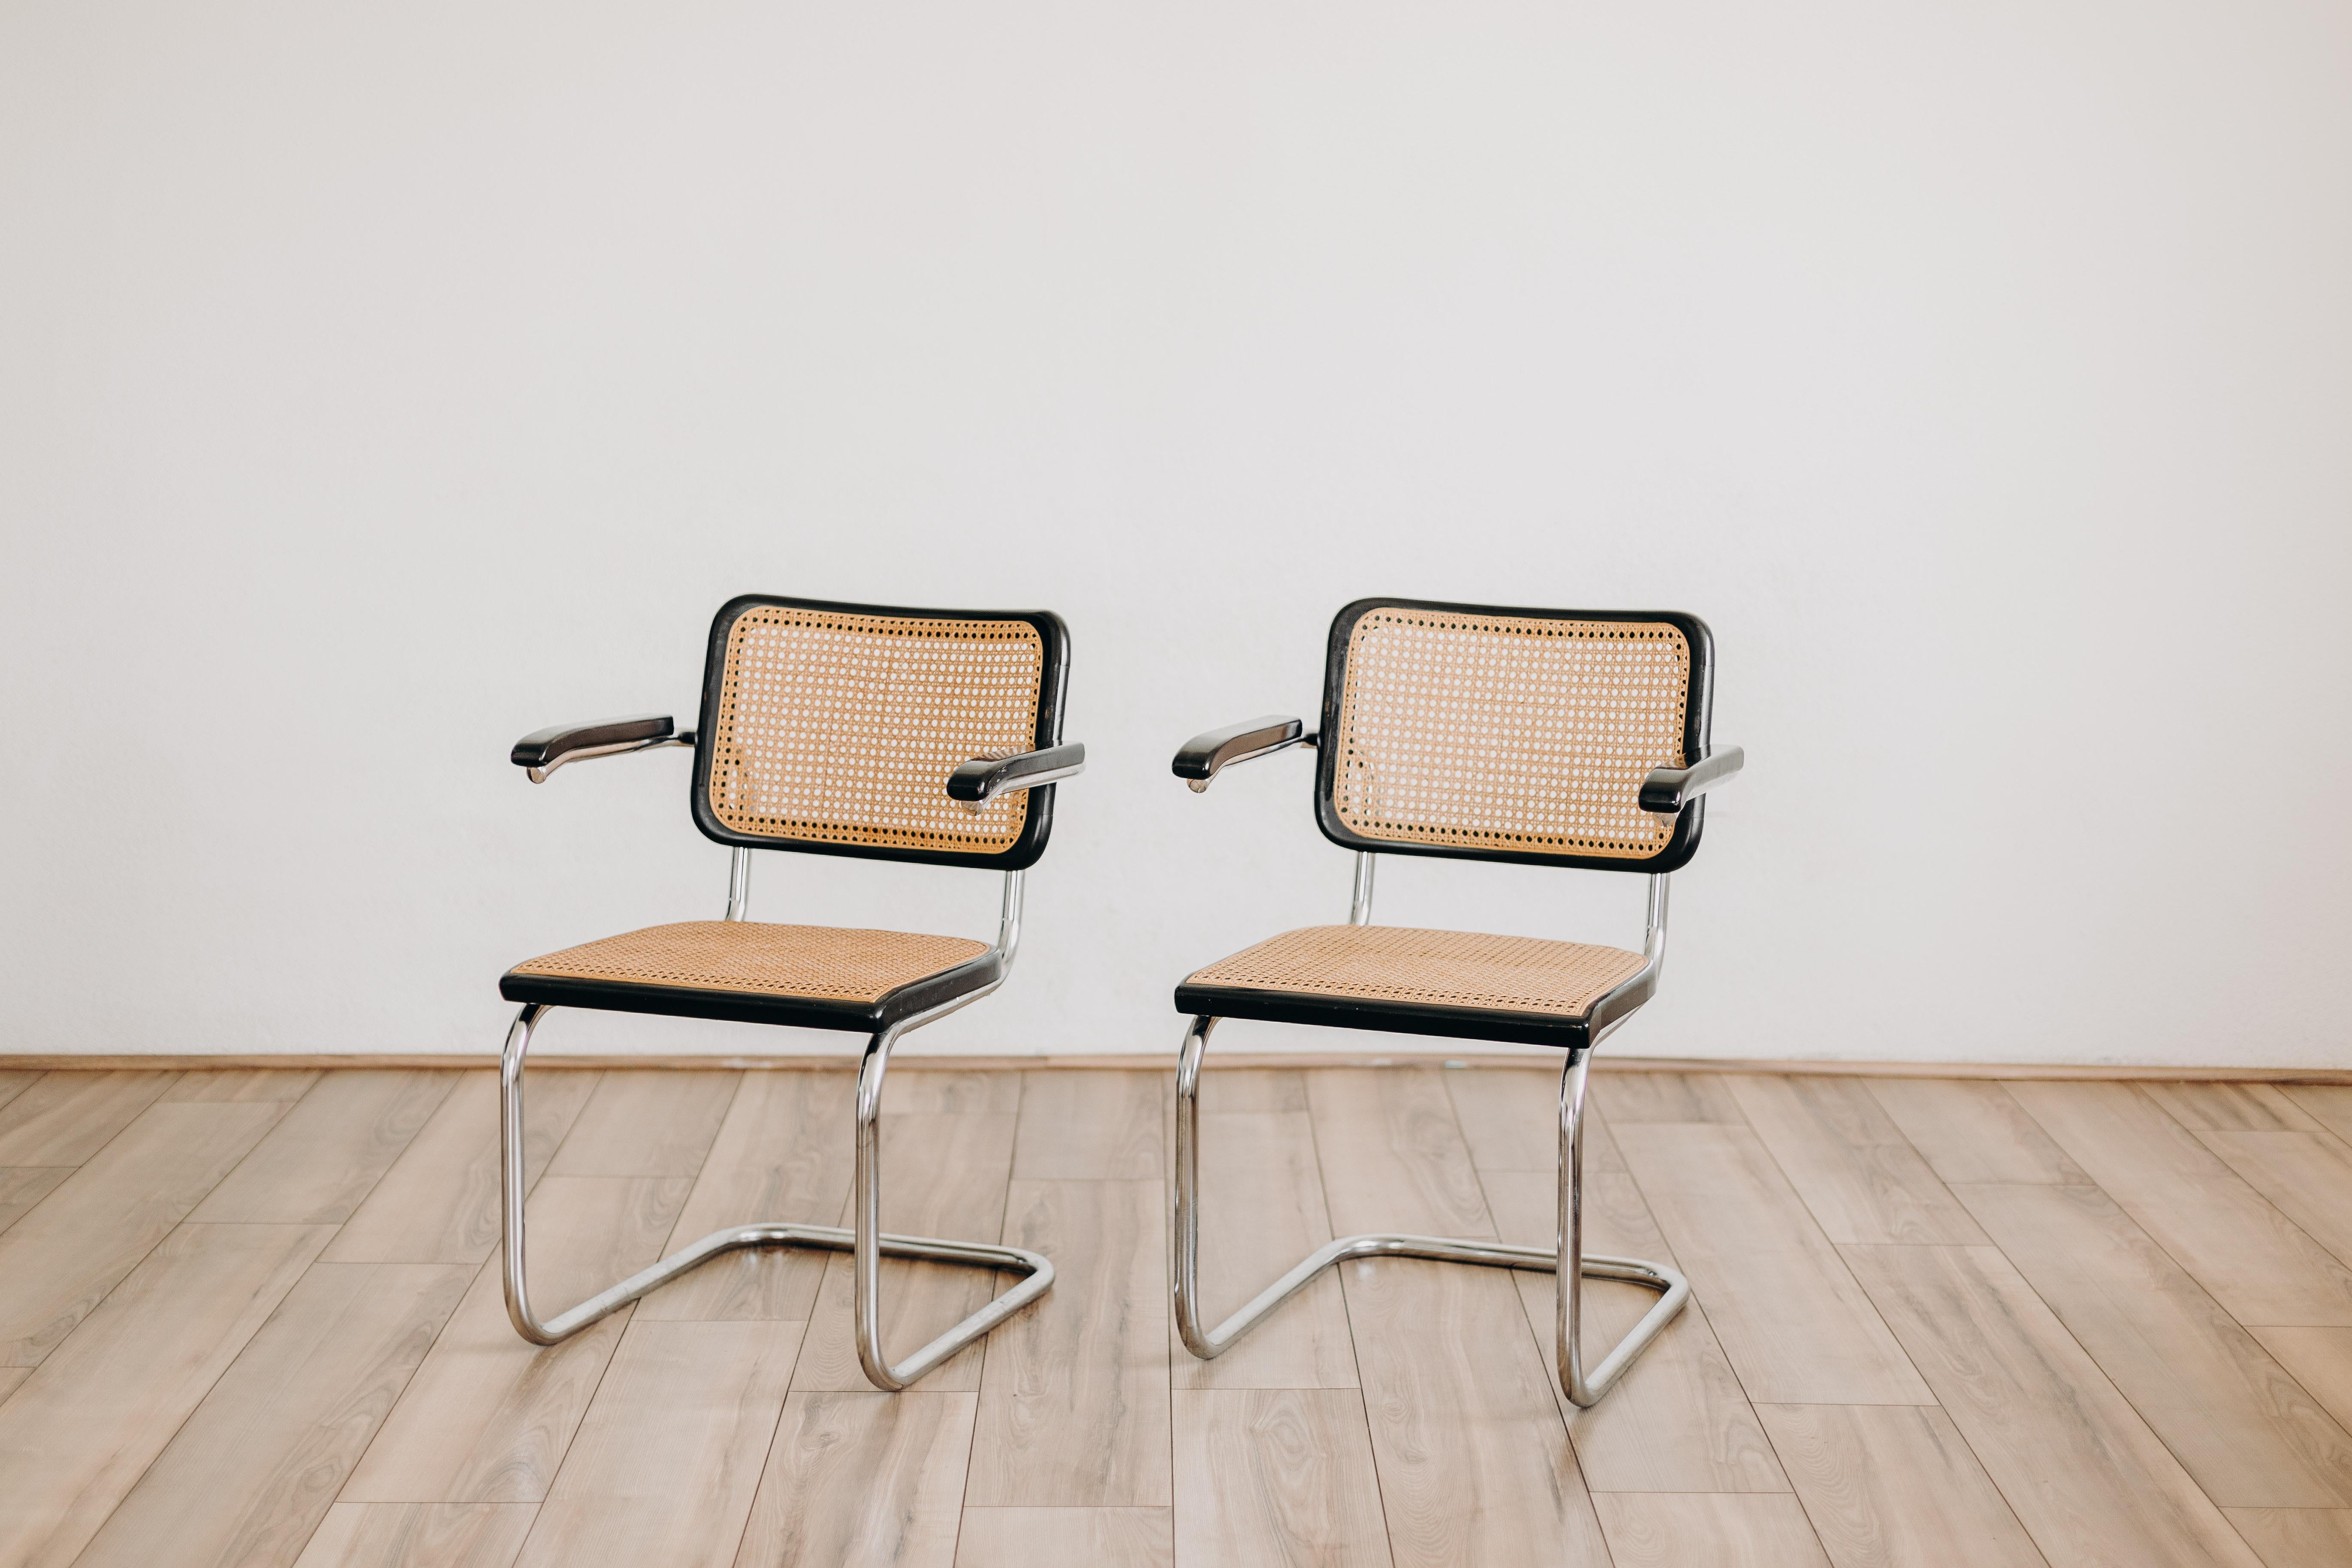 This set of two armchairs, the Cesca B64 model, is an iconic design by the renowned architect and designer Marcel Breuer. Originally designed in the 1930s, these chairs were later re-edited by Thonet in the 1970s, making them a rare and coveted